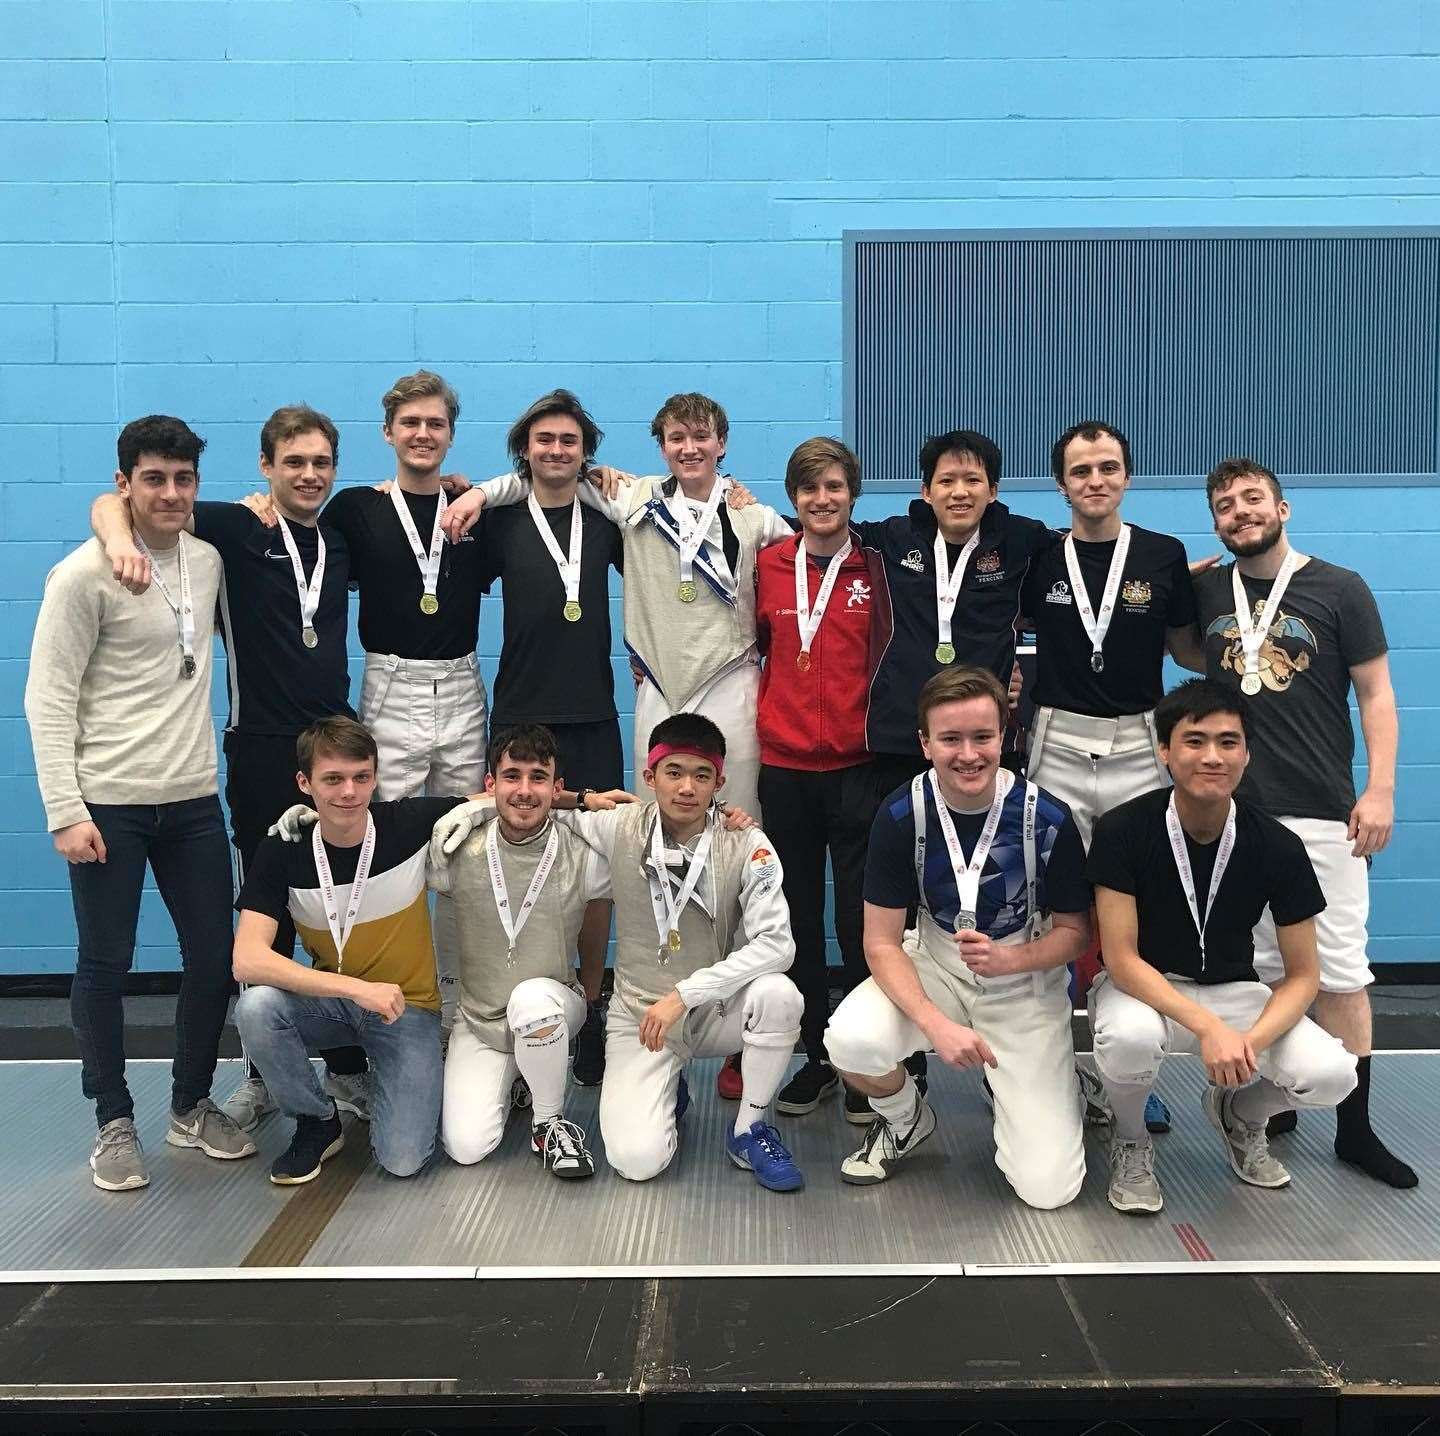 The University of Kent's fencing team